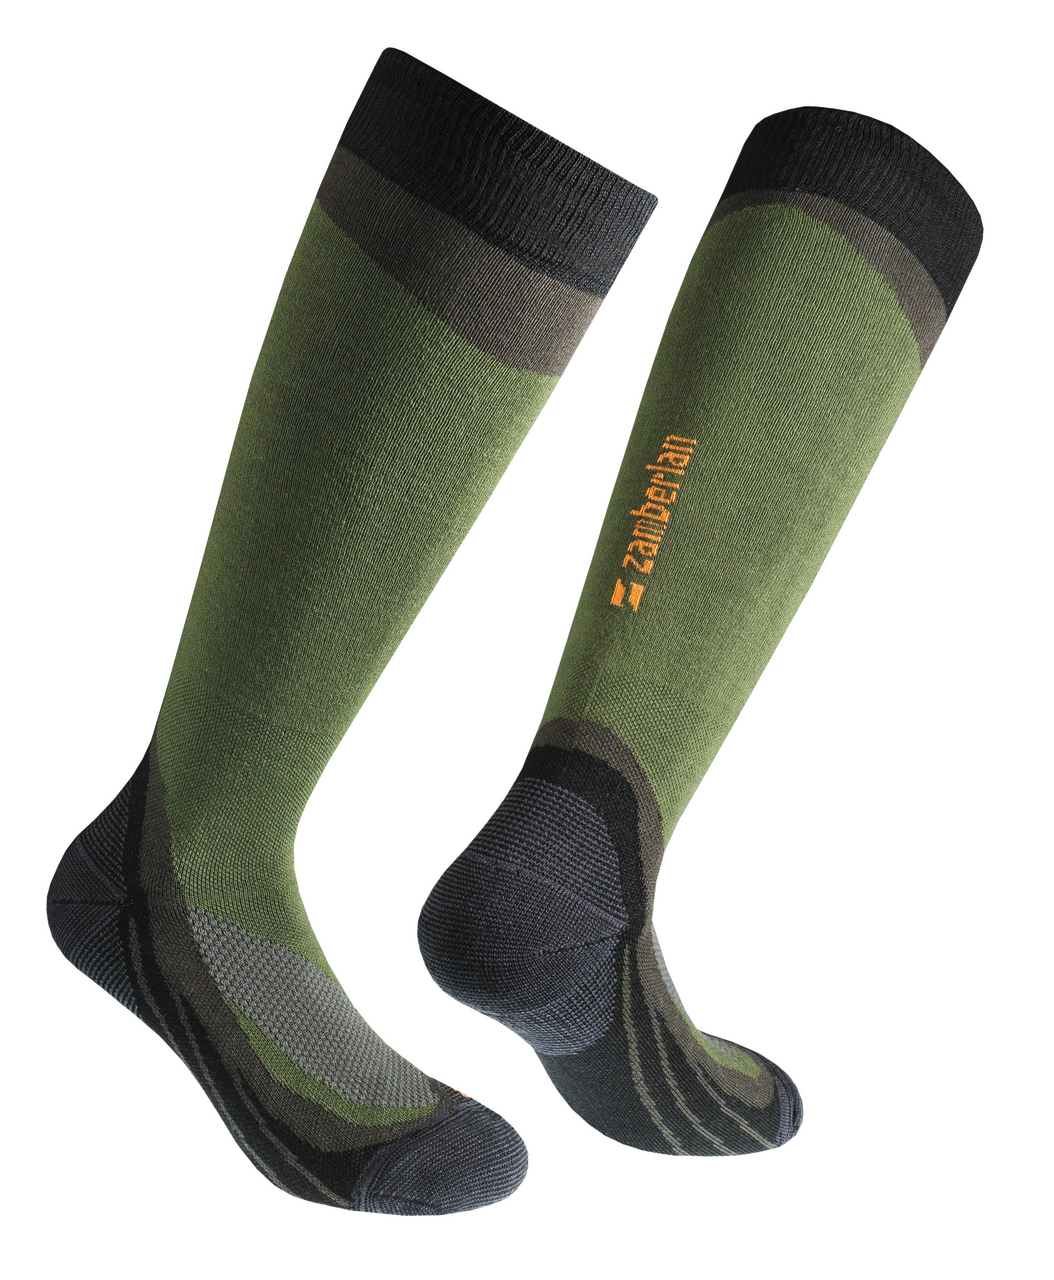 CHAUSSETTES FOREST HIGH 011 Green S